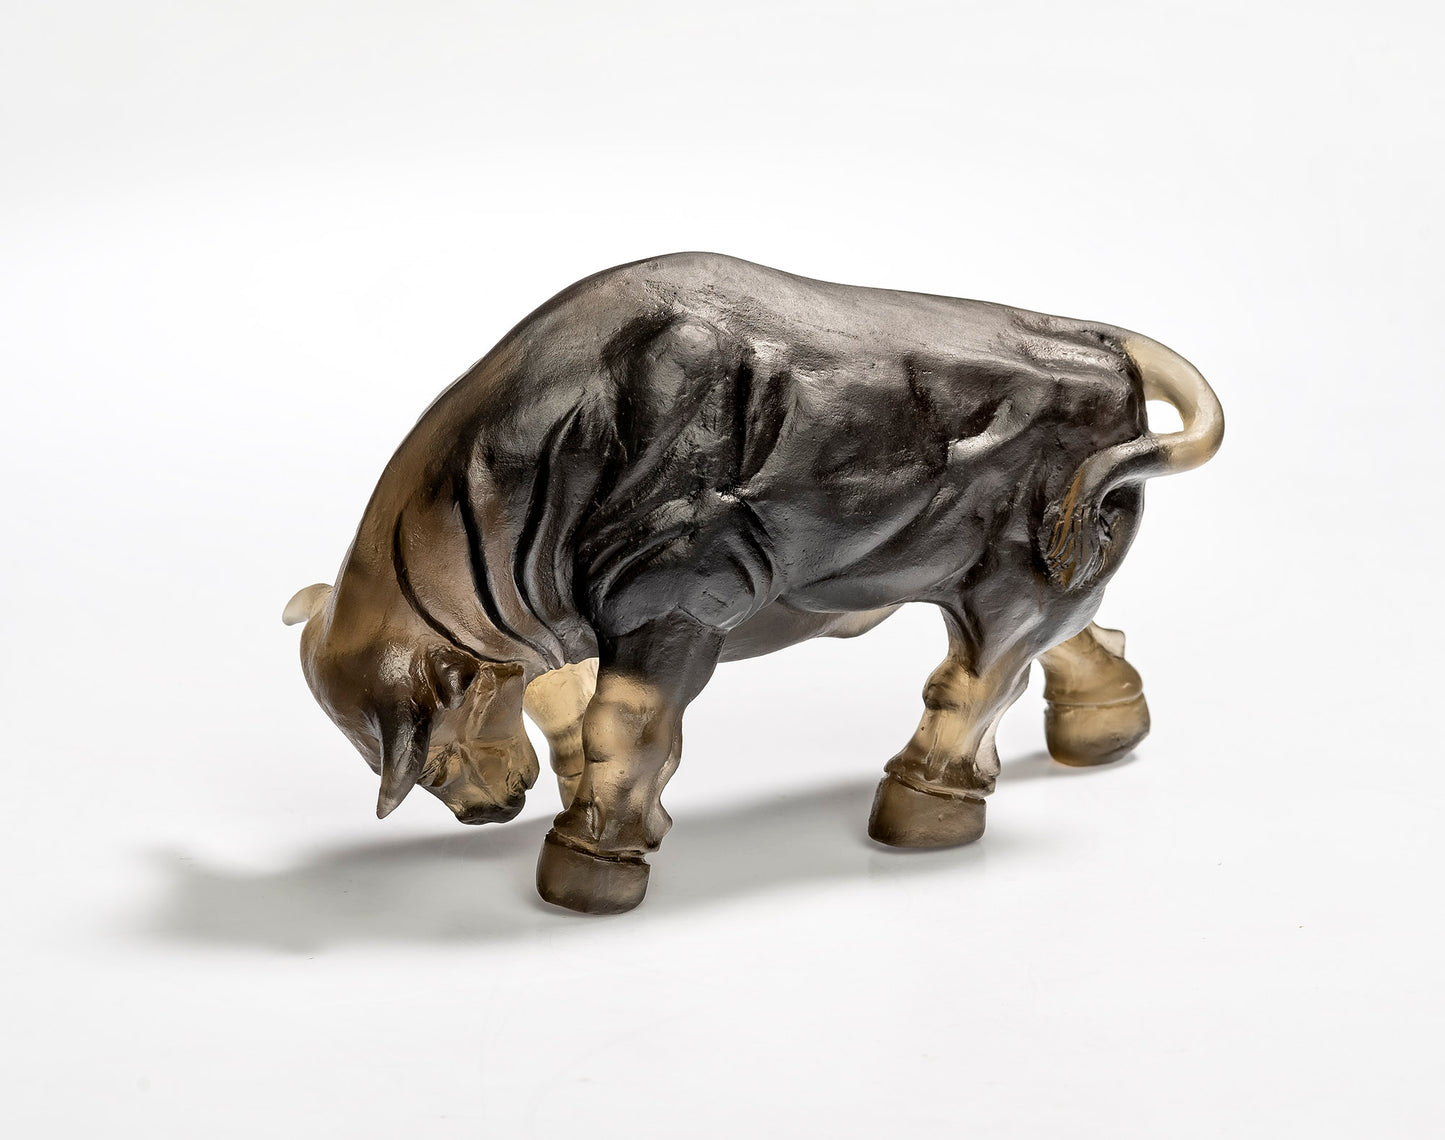 Bull Cast Glass Sculpture Olive on white background looking left